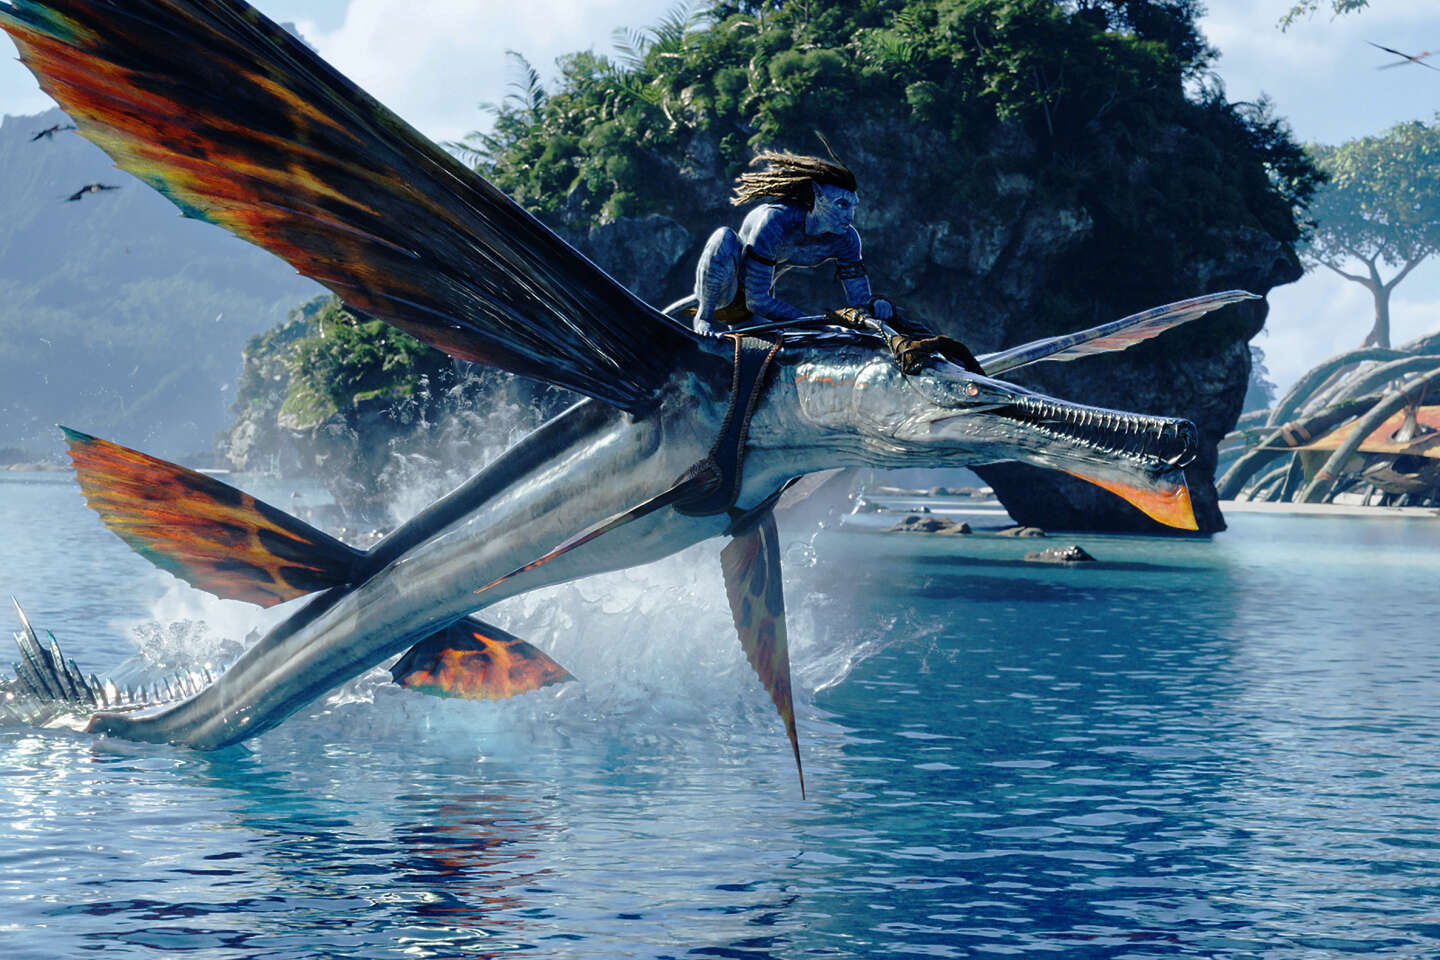 Avatar': 'Do not confuse animal mawkishness with environmental action'